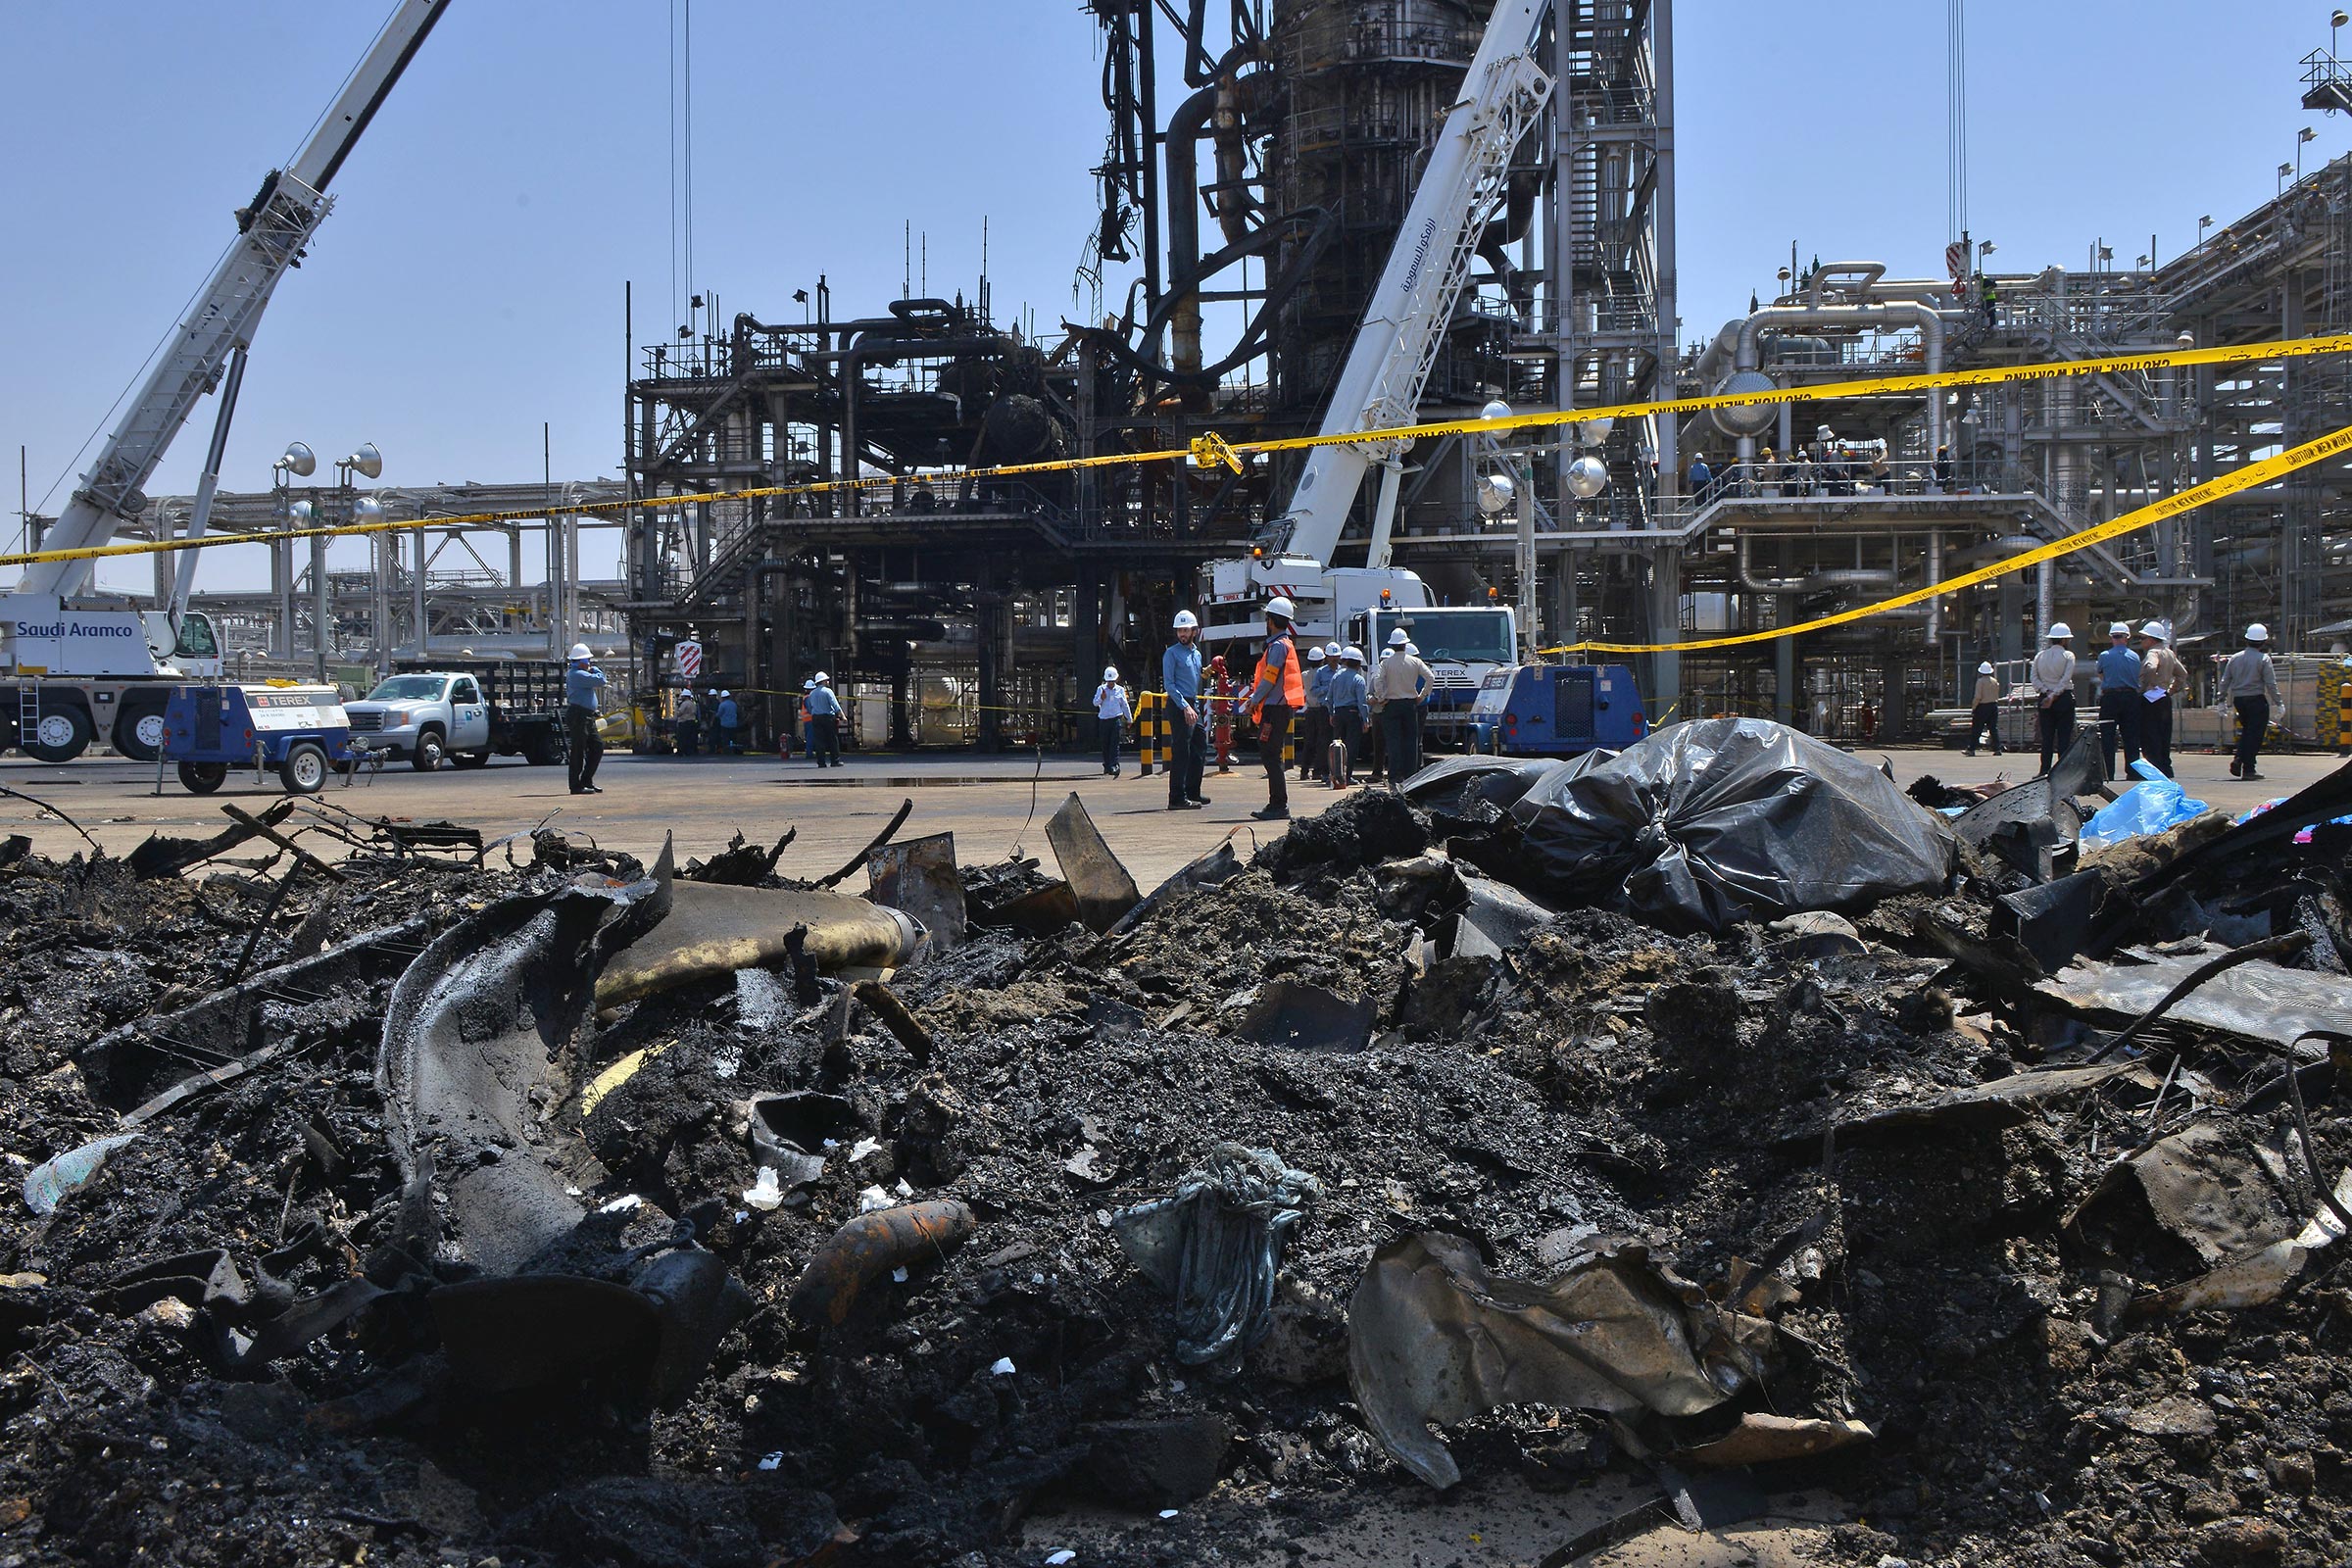 A destroyed installation in Saudi Arabia's Khurais oil processing plant on Sept. 20, 2019.